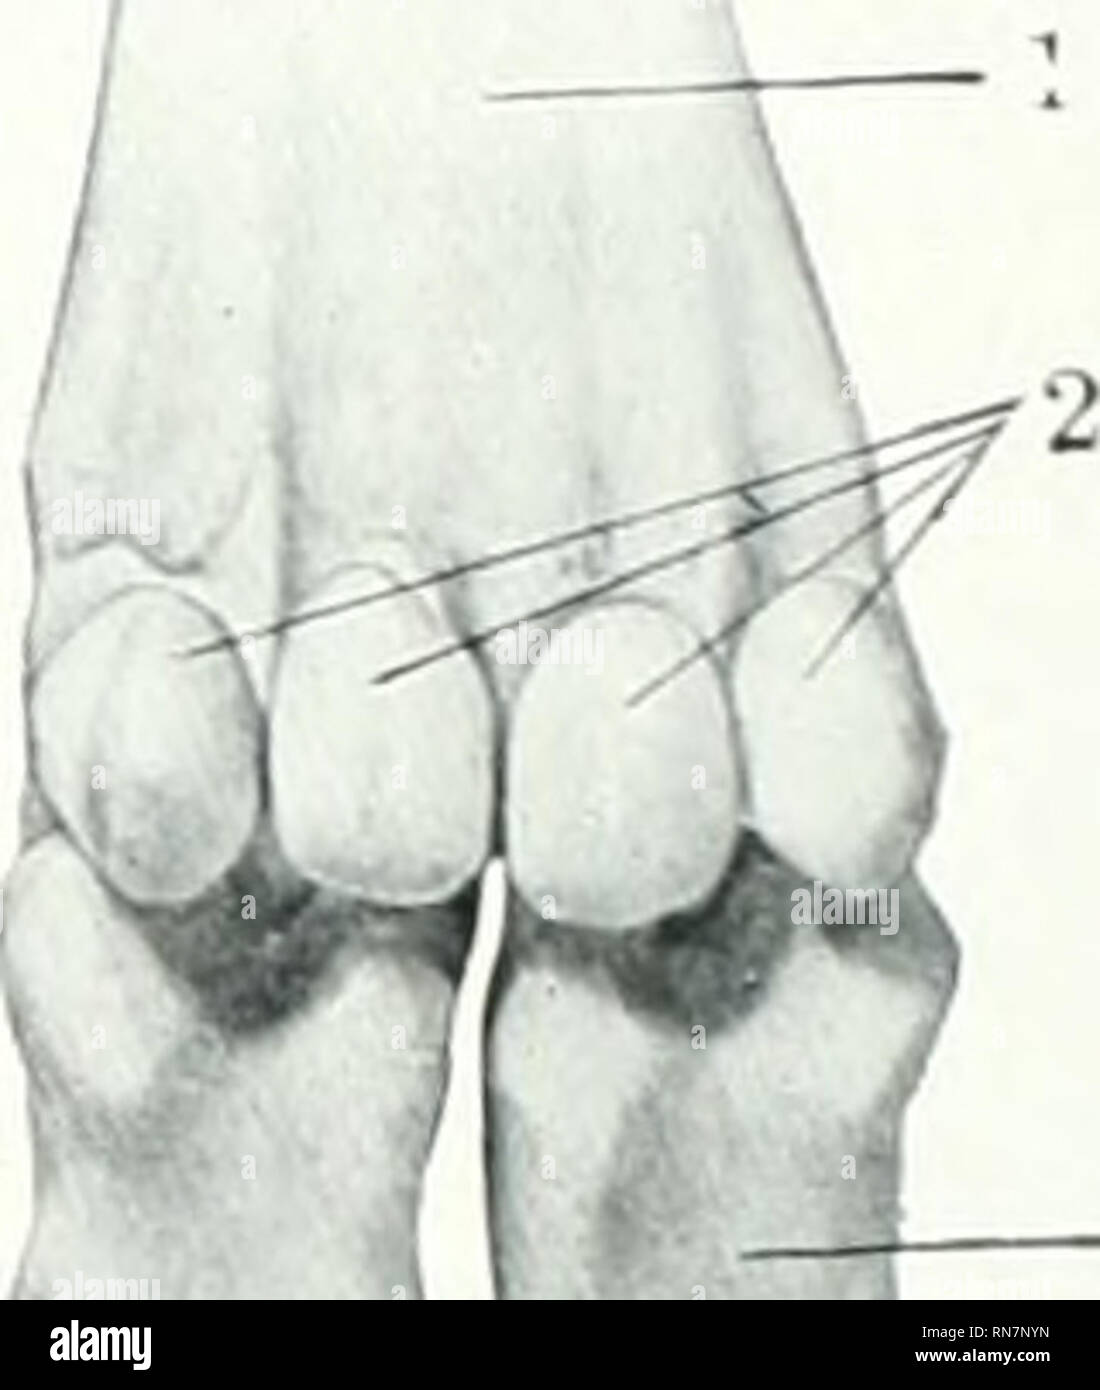 . The anatomy of the domestic animals. Veterinary anatomy. yg , 1.51.—Bon FOEE I.i Fig. 152.—Bone Fore Limb op Ox; L.I . VlJ 1, Distal end of metacarpal bone; 2, first phalanx: 3, proximal sesamoid bone; 4, second phalanx; 5, ex- tensor process of third phalanx; G, dorsal surface; 7, angle; S, distal sesamoid bone. 1, Metacarpal bone; 2, proximal sesamoid bones; 3, first phalanx; 4, second phalanx; 5, distal sesamoid bone; G, third phalanx. Near and on the extensor process are several relatively large foramina. The slope of the surface is very steep posteriorly, but in front it forms an angle  Stock Photo